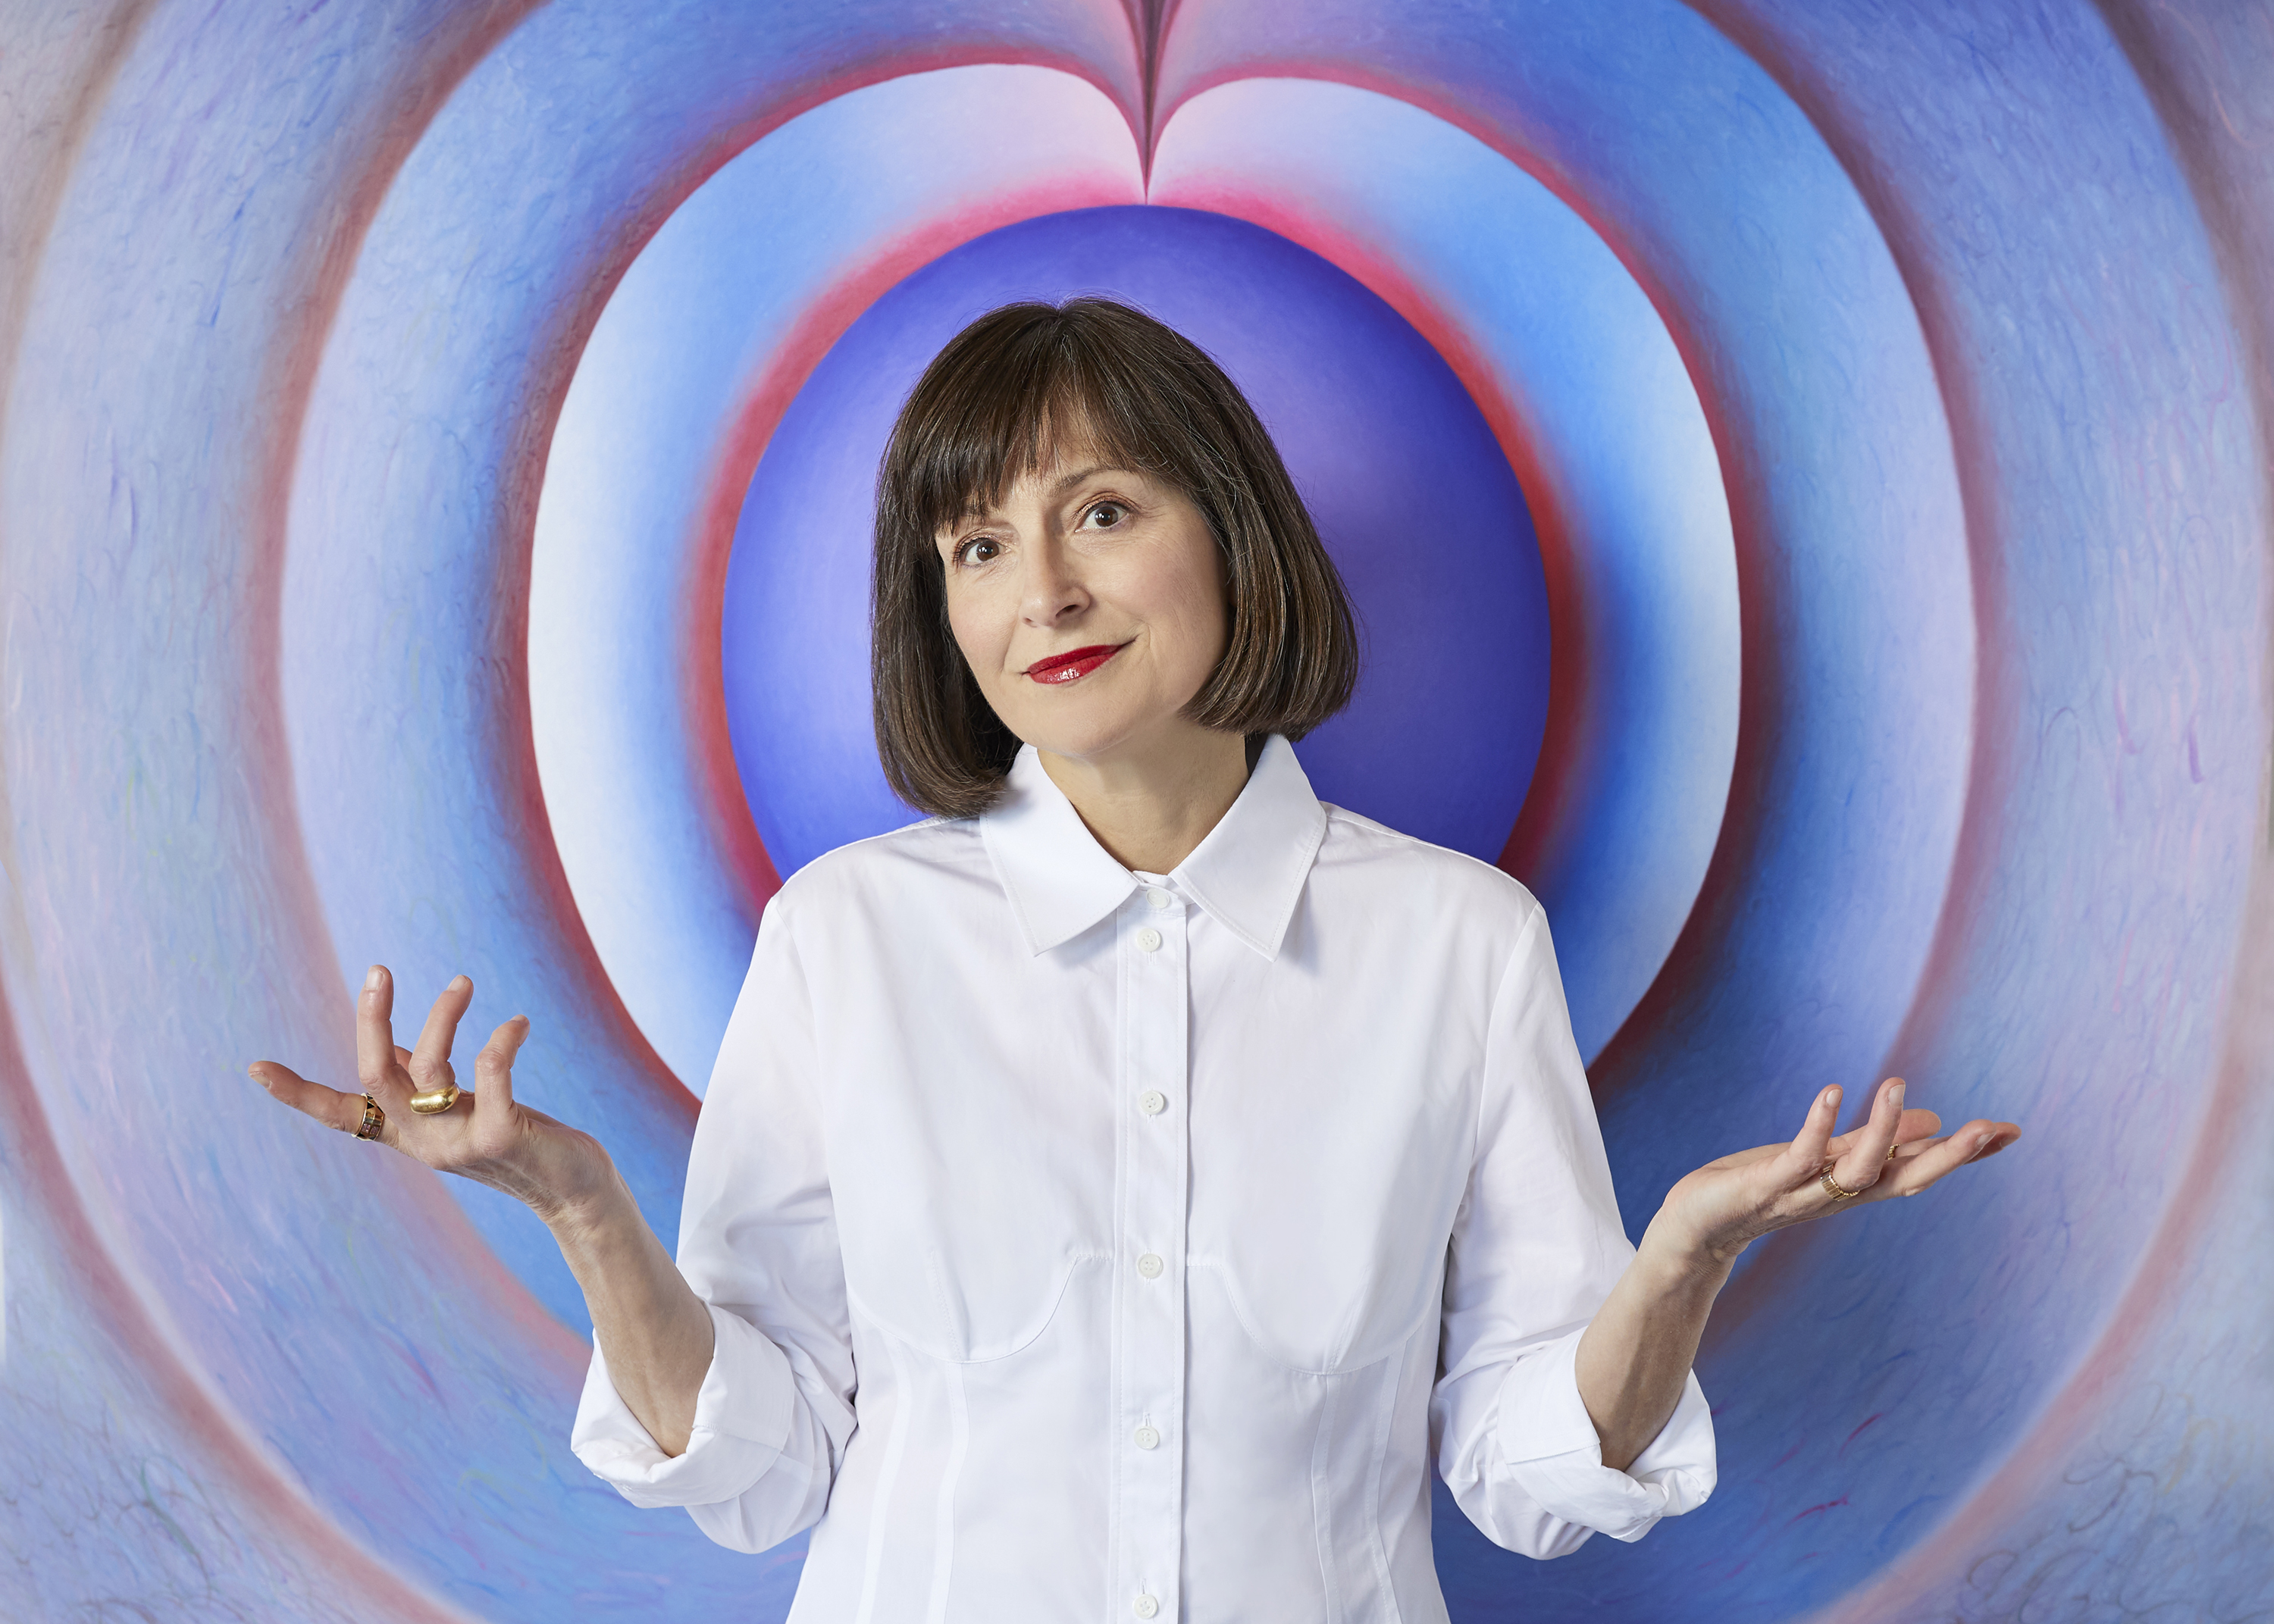 A woman in a white shirt gestures with a whimsical look against a colorful swirl backdrop.